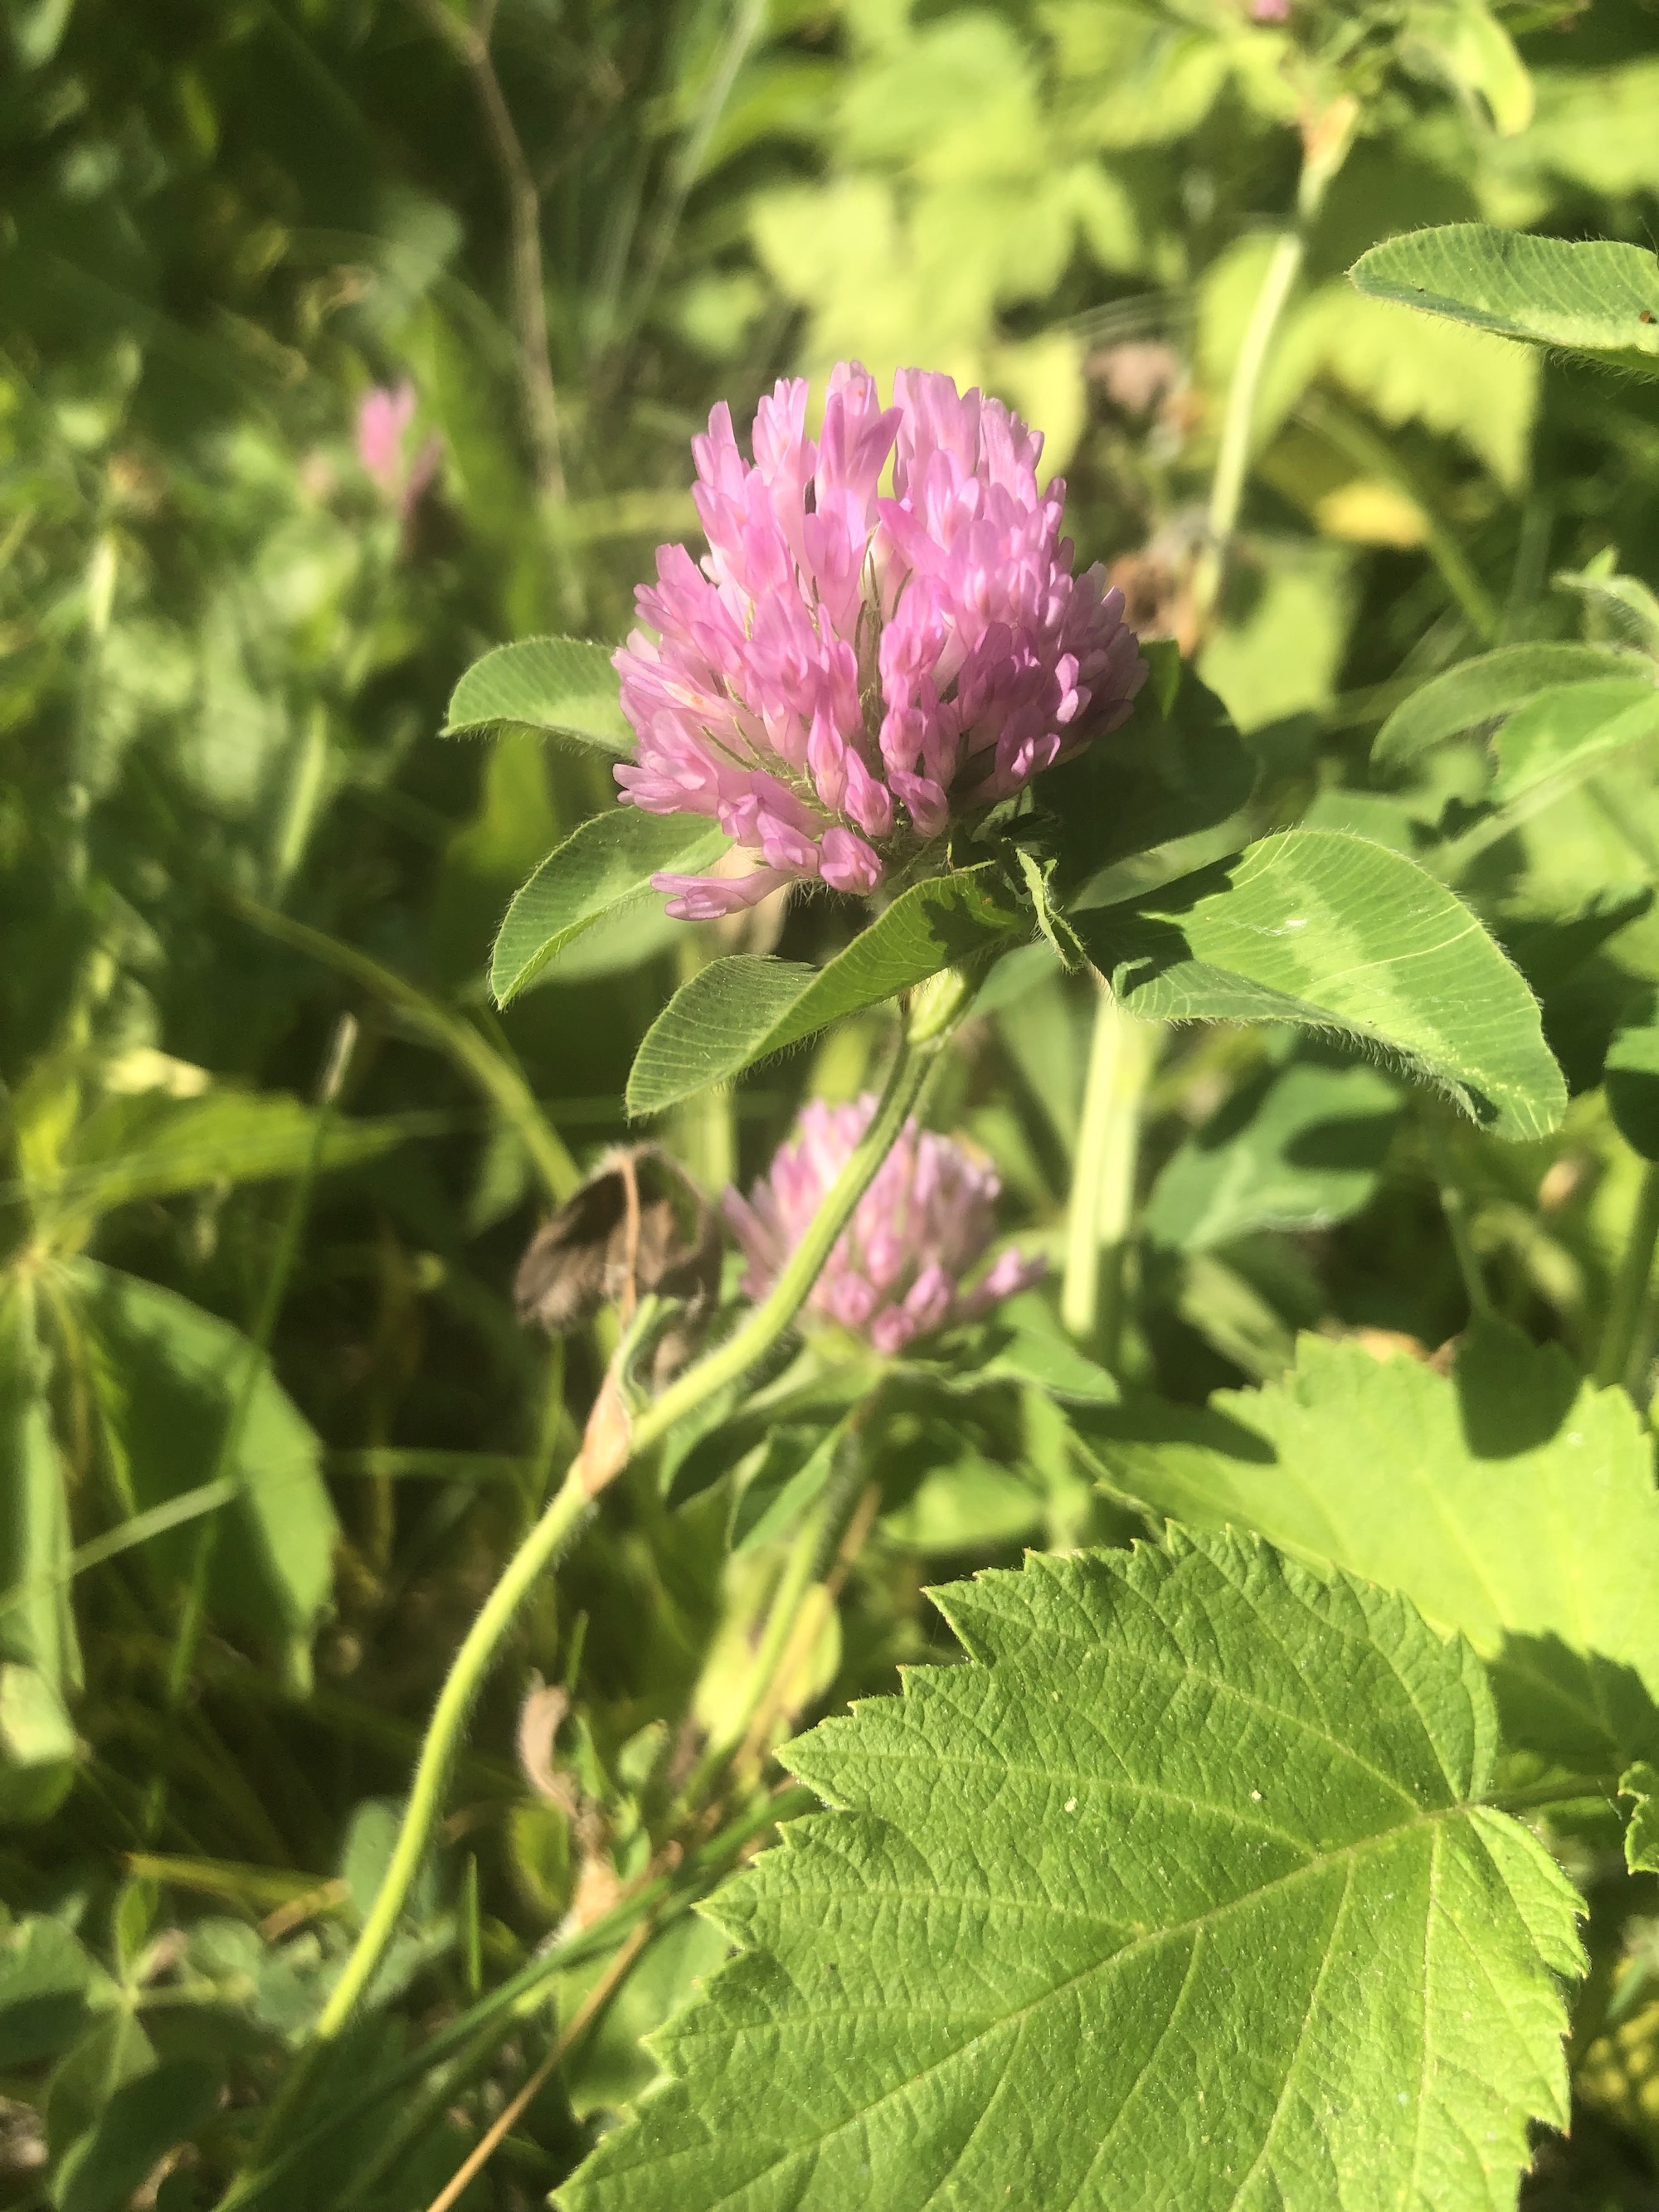 Red Clover in Marion Dunn Prairie in Madison, Wisconsin on June 15, 2021.